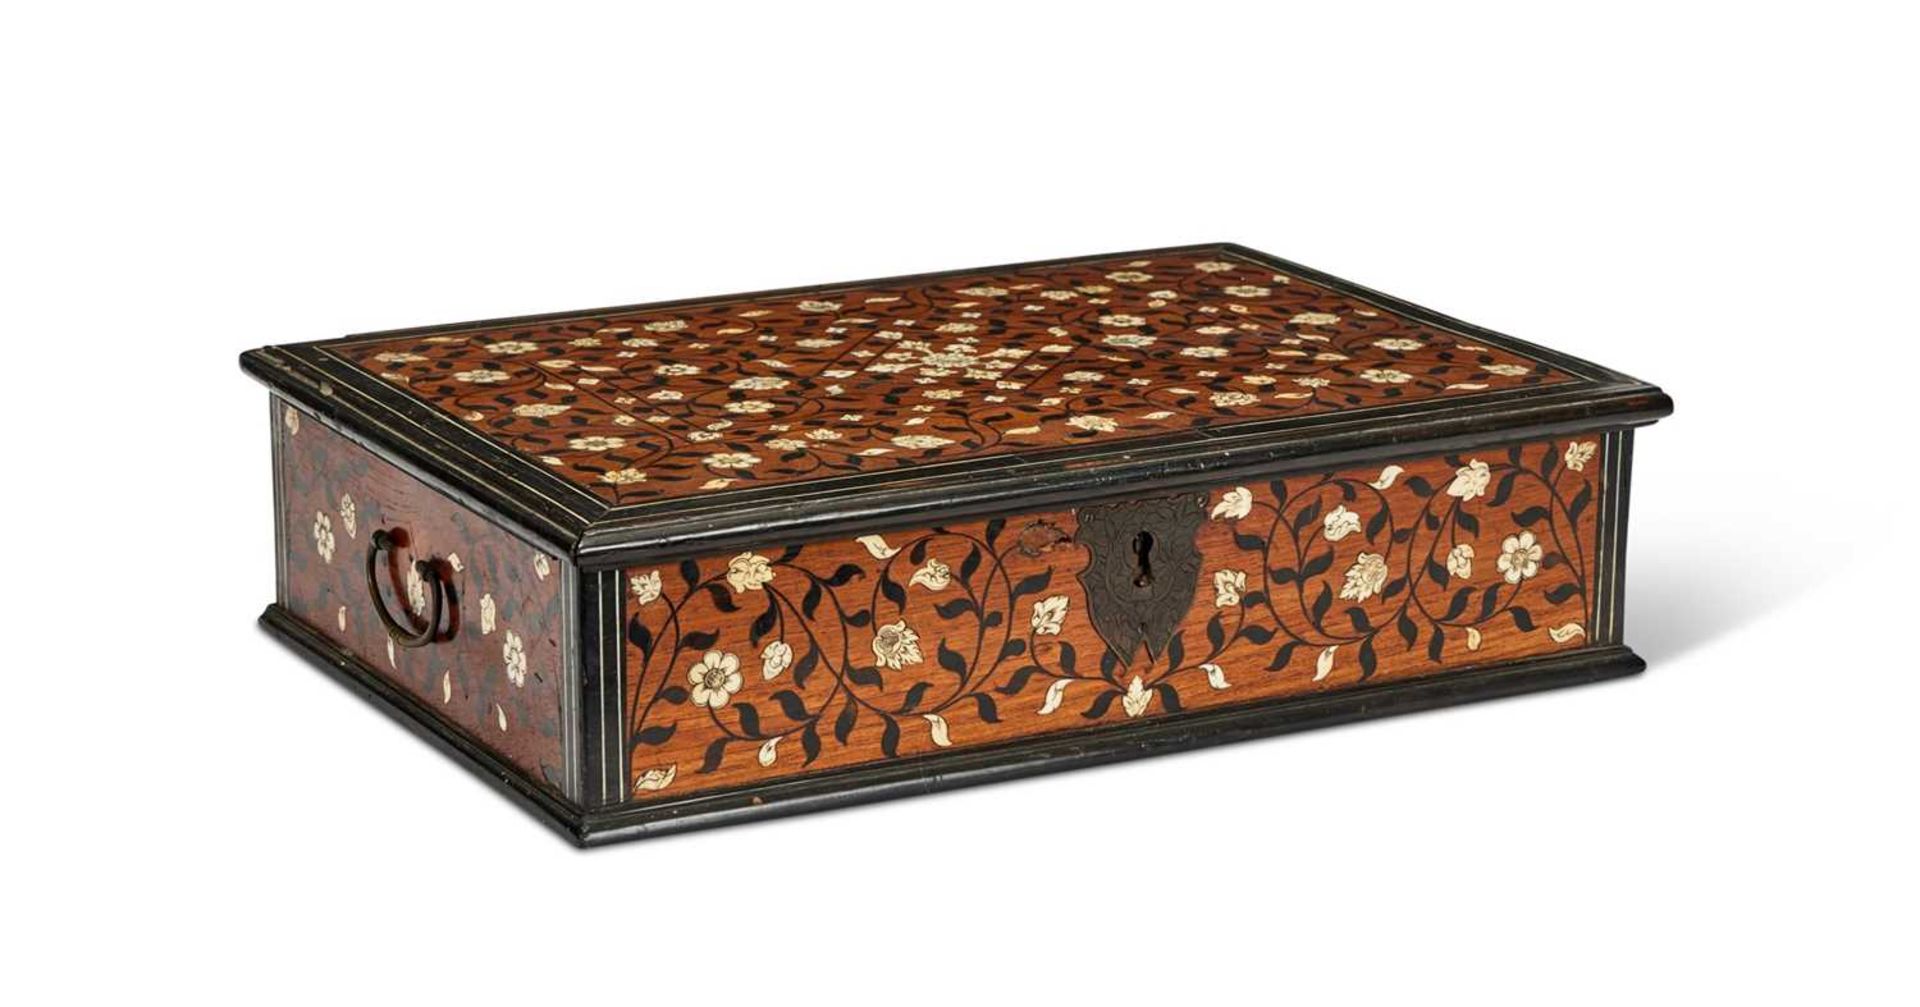 AN EARLY 18TH CENTURY ANGLO-INDIAN IVORY INLAID WORK BOX, PROBABLY GUJARAT